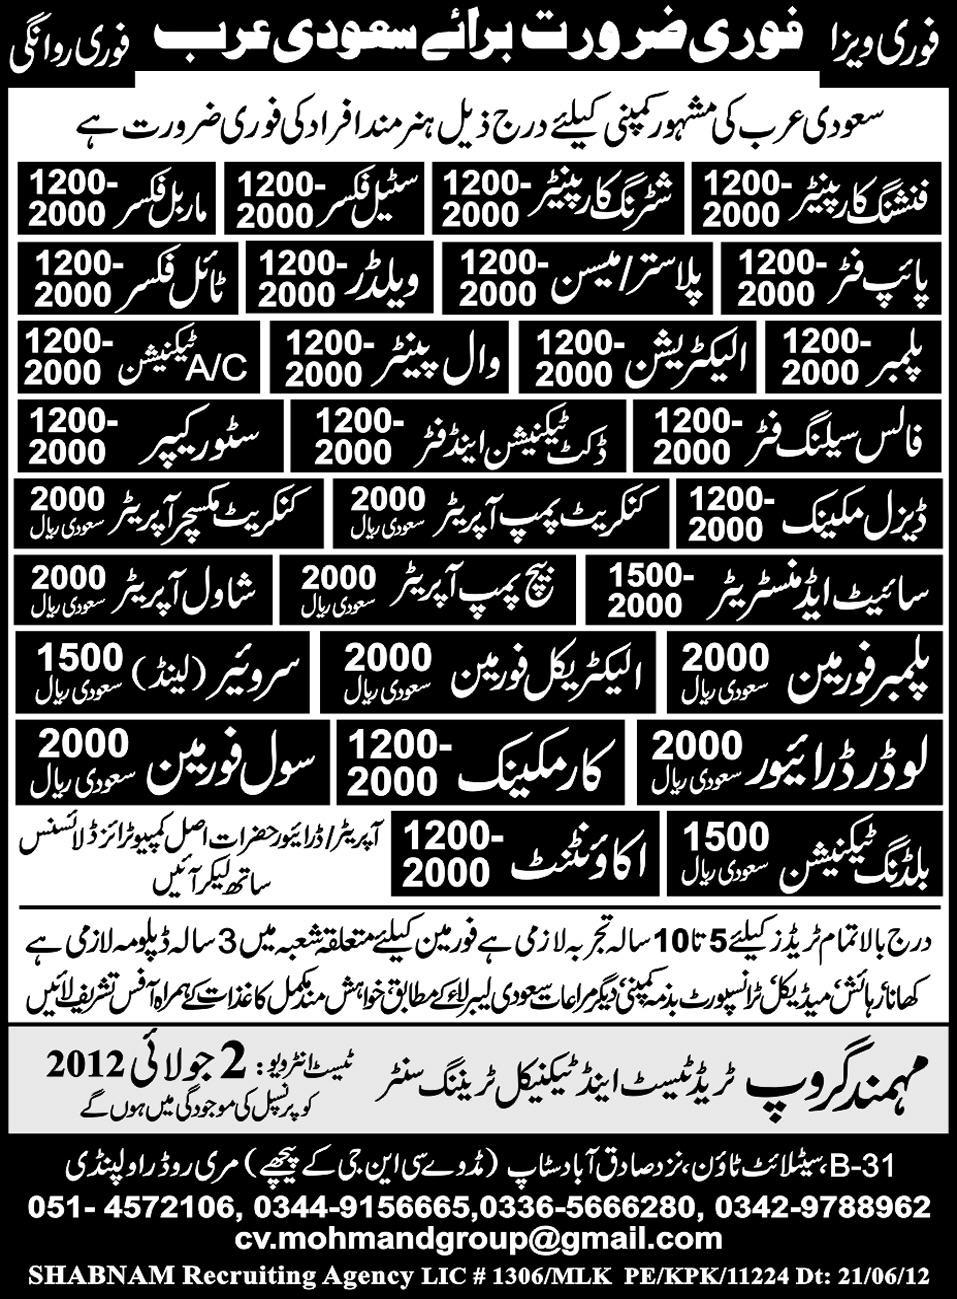 Technical, Mechanical Staff and Operators Required by Mohmand Group Trade Test & Technical Training Centre